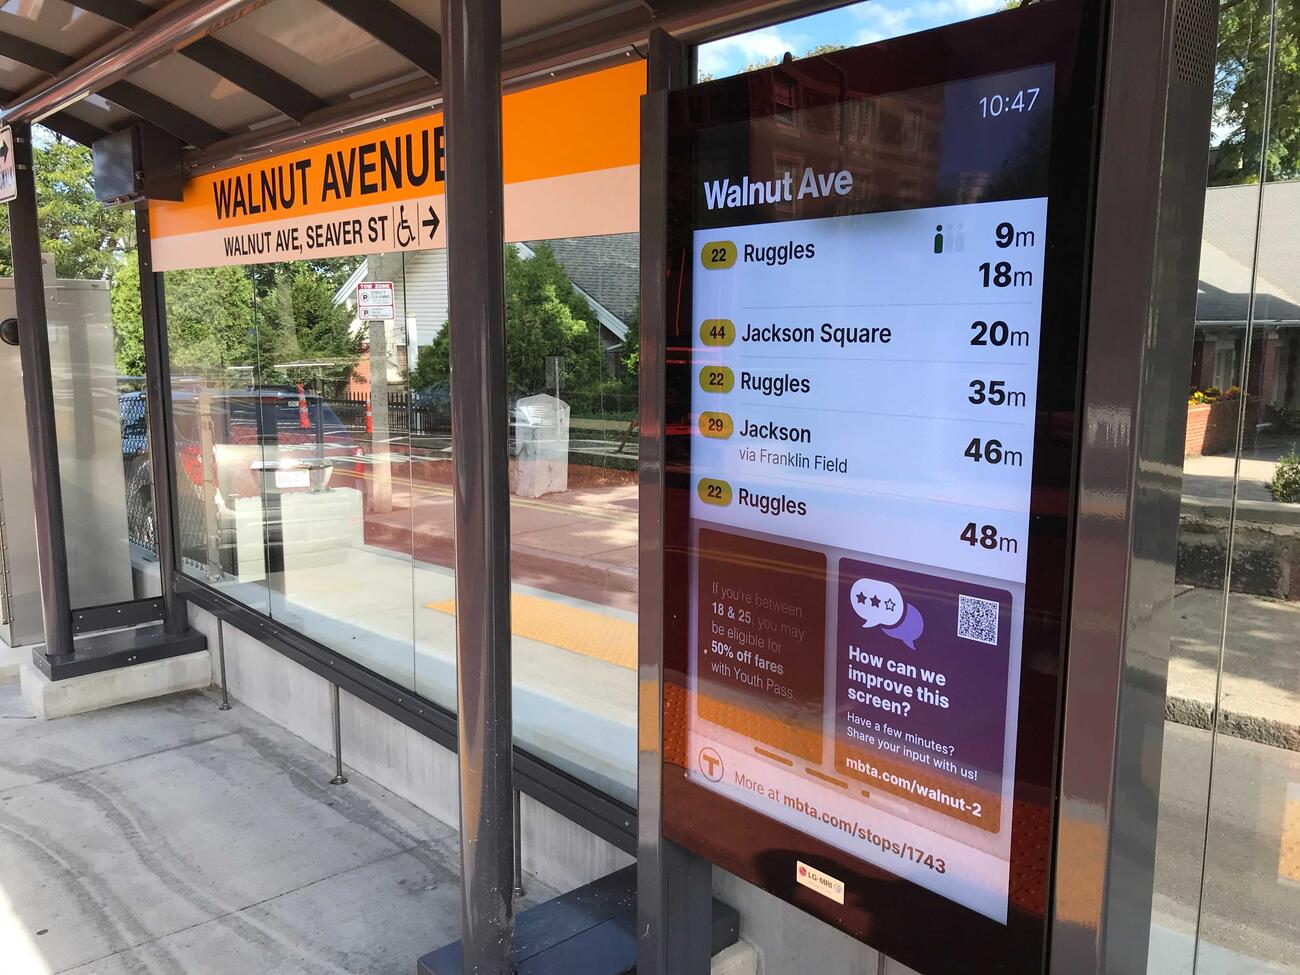 The Walnut Avenue bus shelter on Columbus Avenue has a large digital screen that shows the time, the stop name, and the predicted arrival times for the next six buses scheduled to arrive there. The screen also mentions 50%-off Youth Pass fares, and asks riders to tell us how we can improve this screen by going to this web address: mbta.com/walnut-2